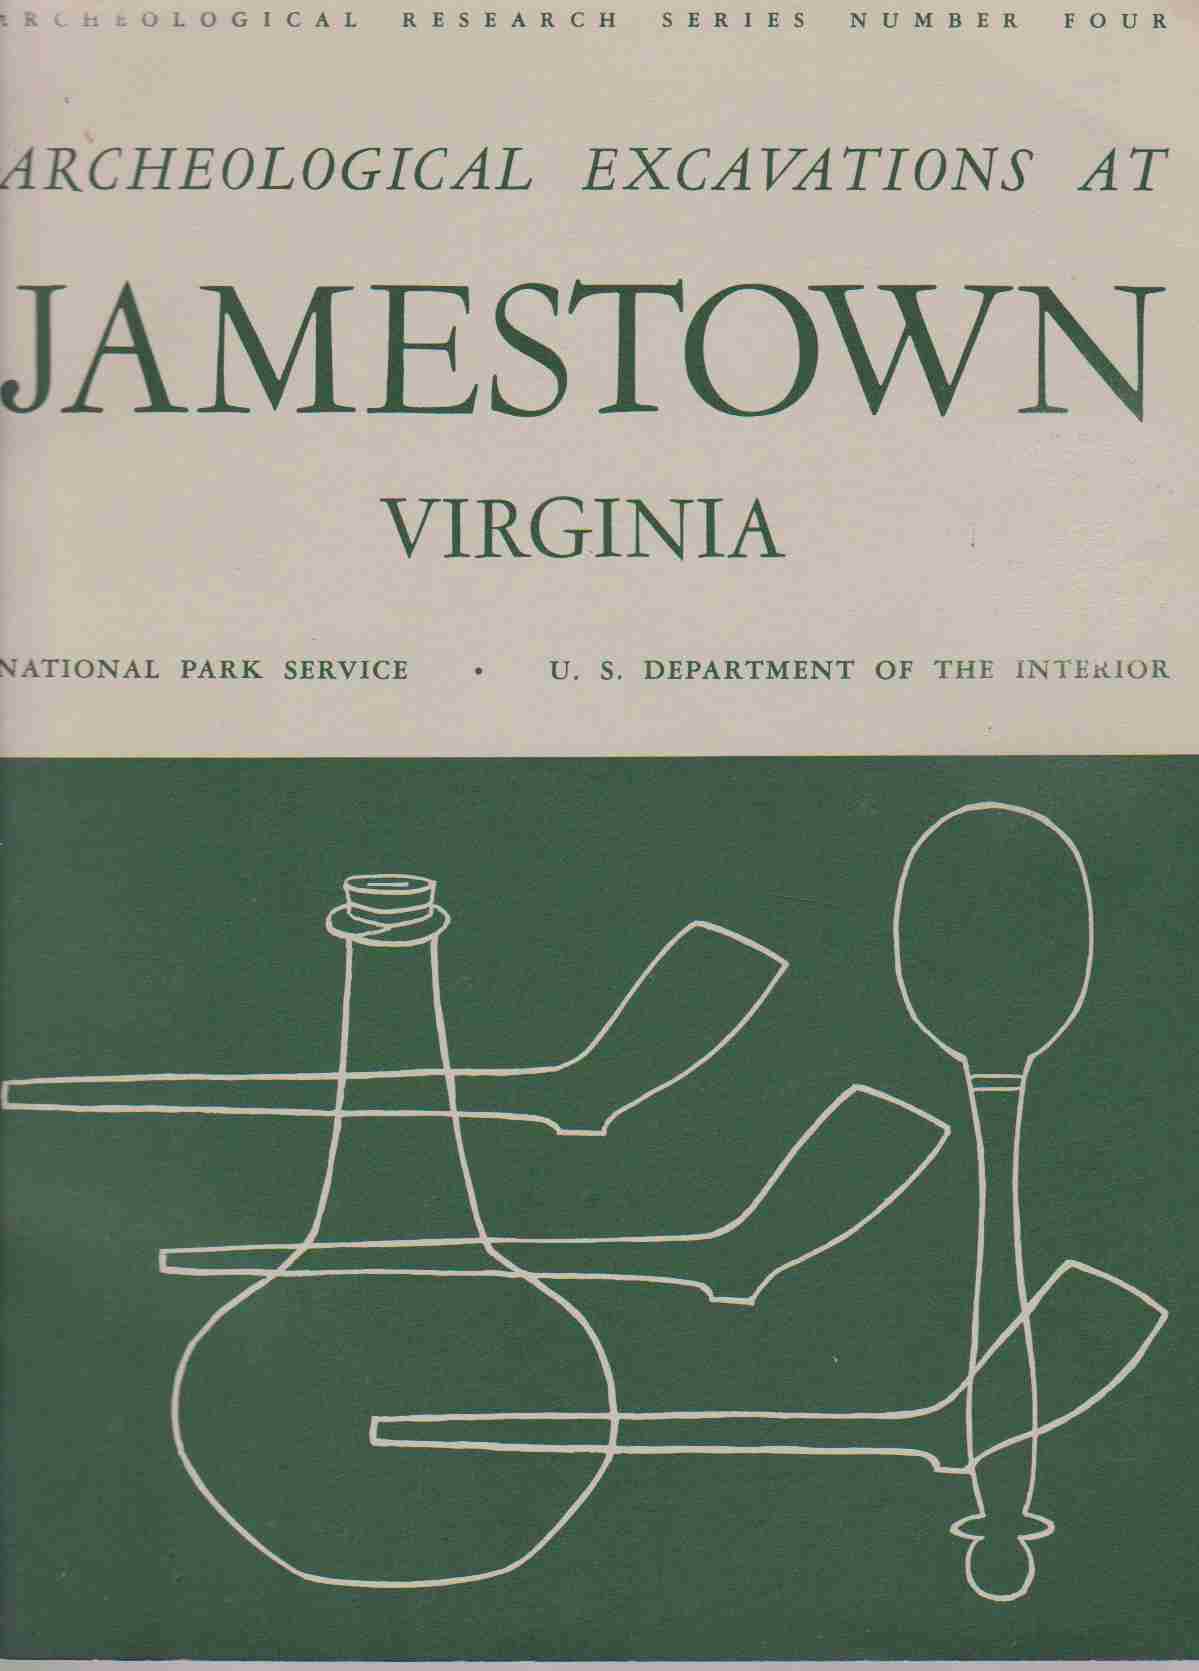 Image for ARCHEOLOGICAL EXCAVATIONS AT JAMESTOWN VIRGINIA Colonial National Historical Park and Jamestown National Historic Site